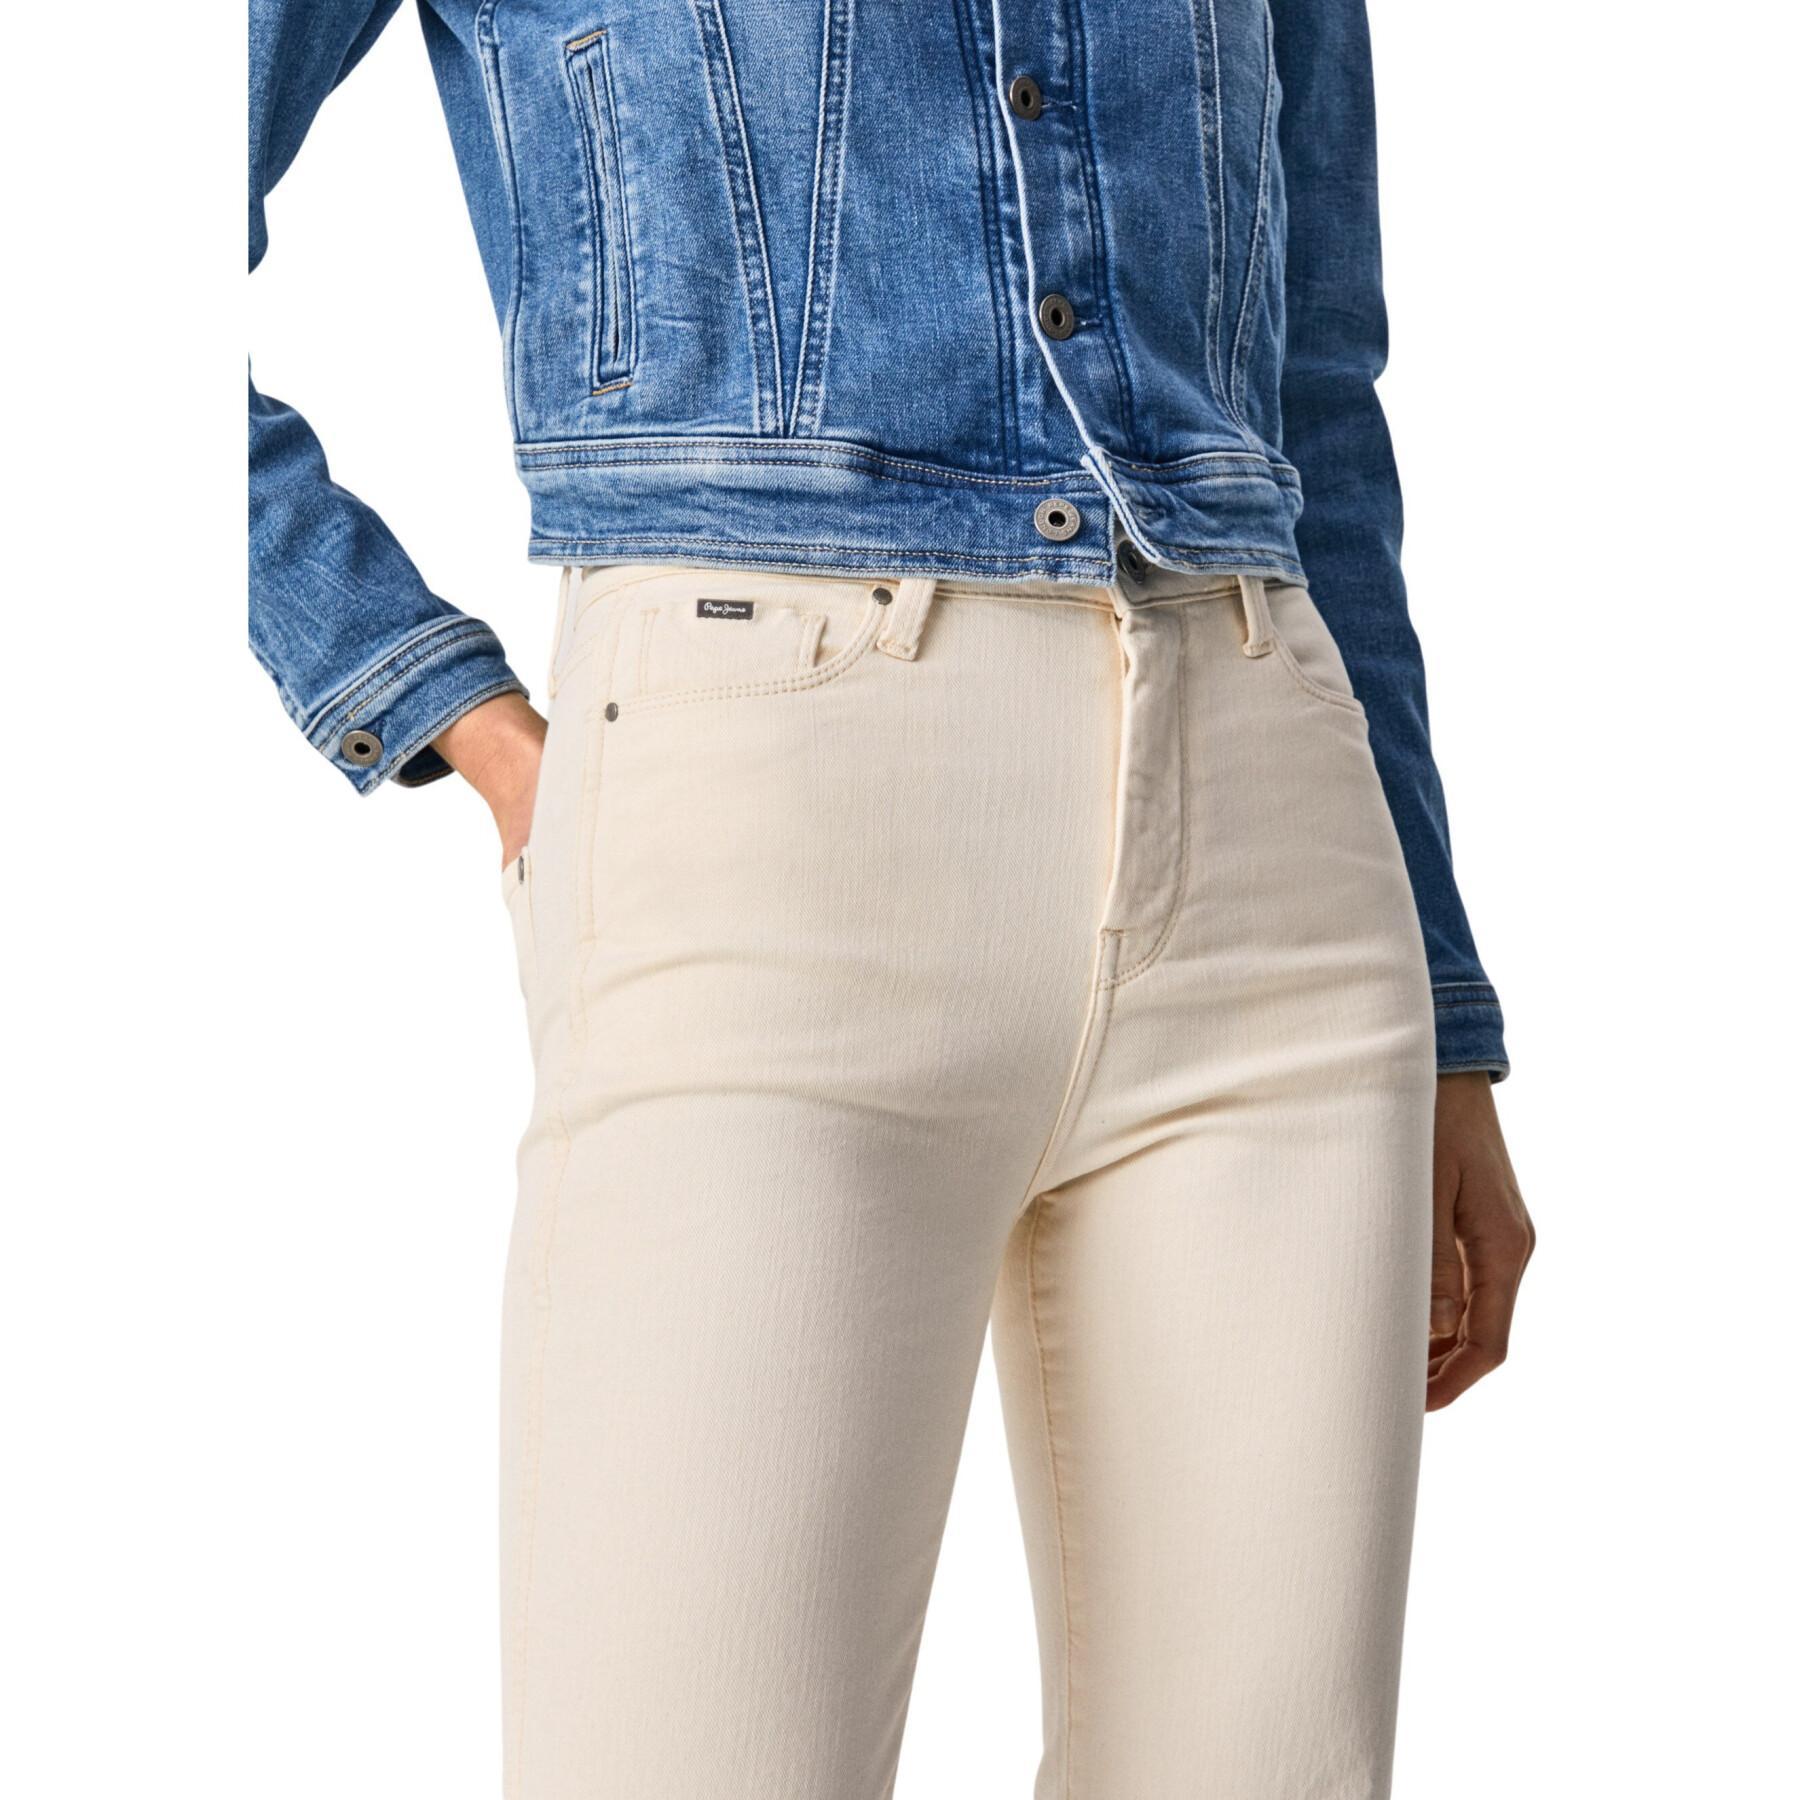 Jeans vrouw Pepe Jeans Dion